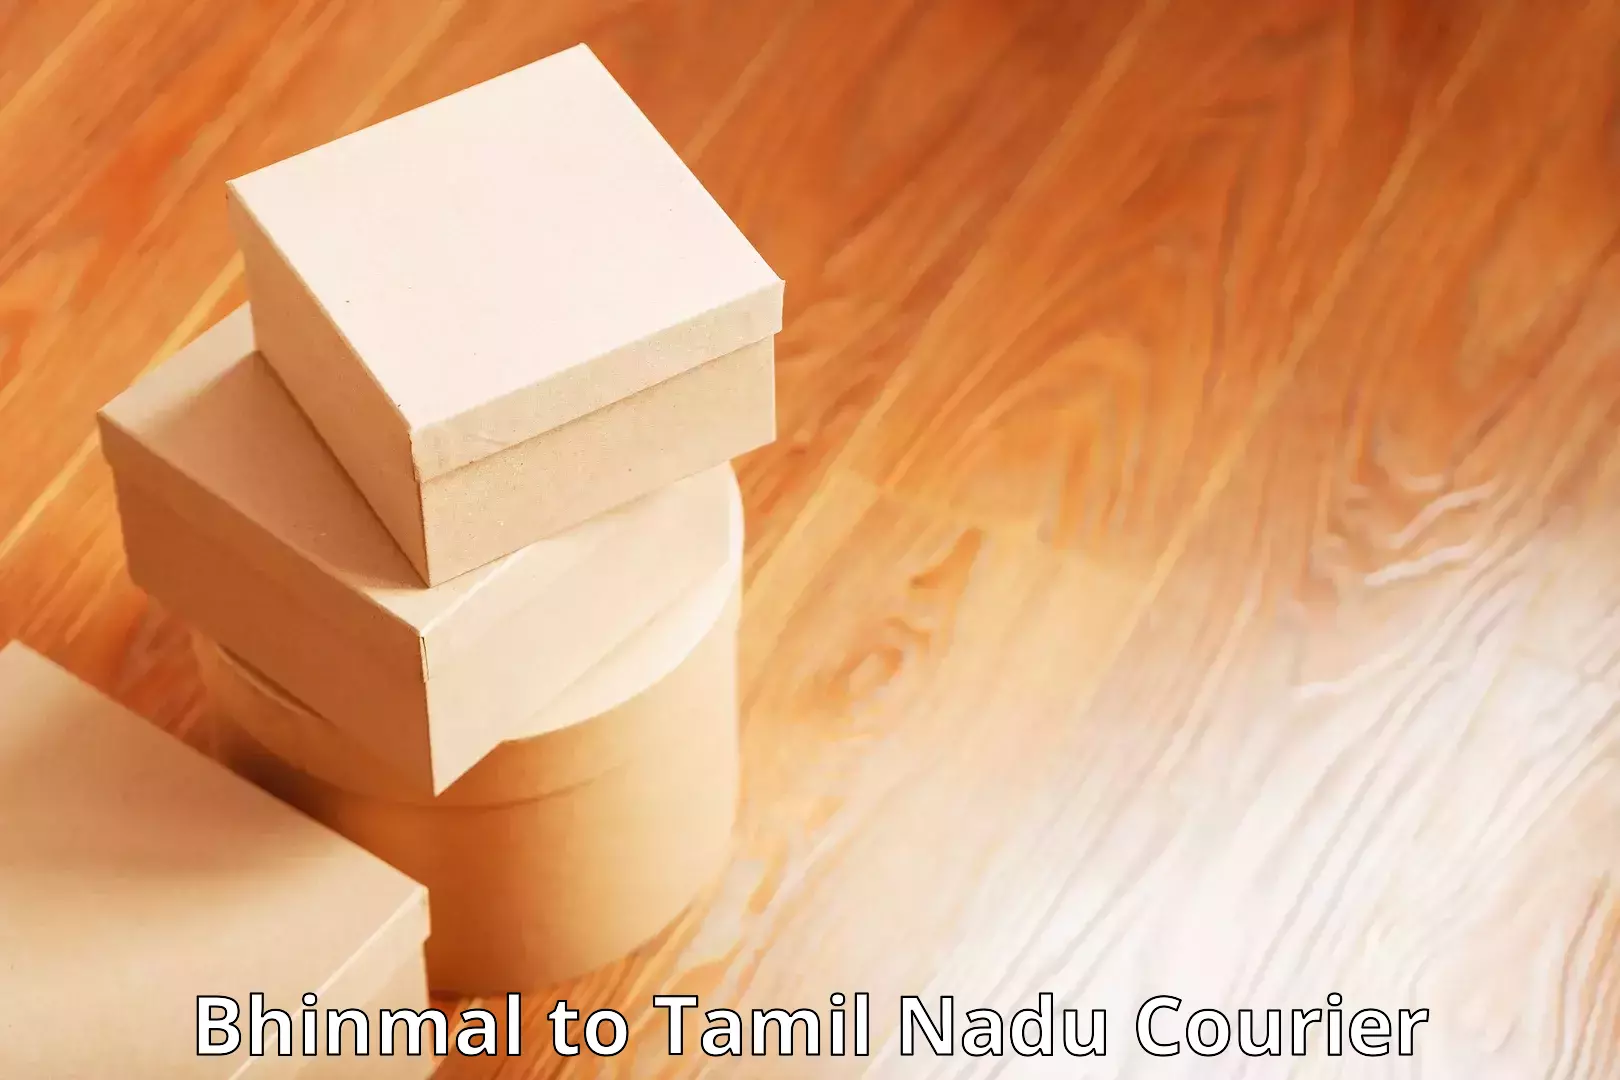 State-of-the-art courier technology Bhinmal to Melmaruvathur